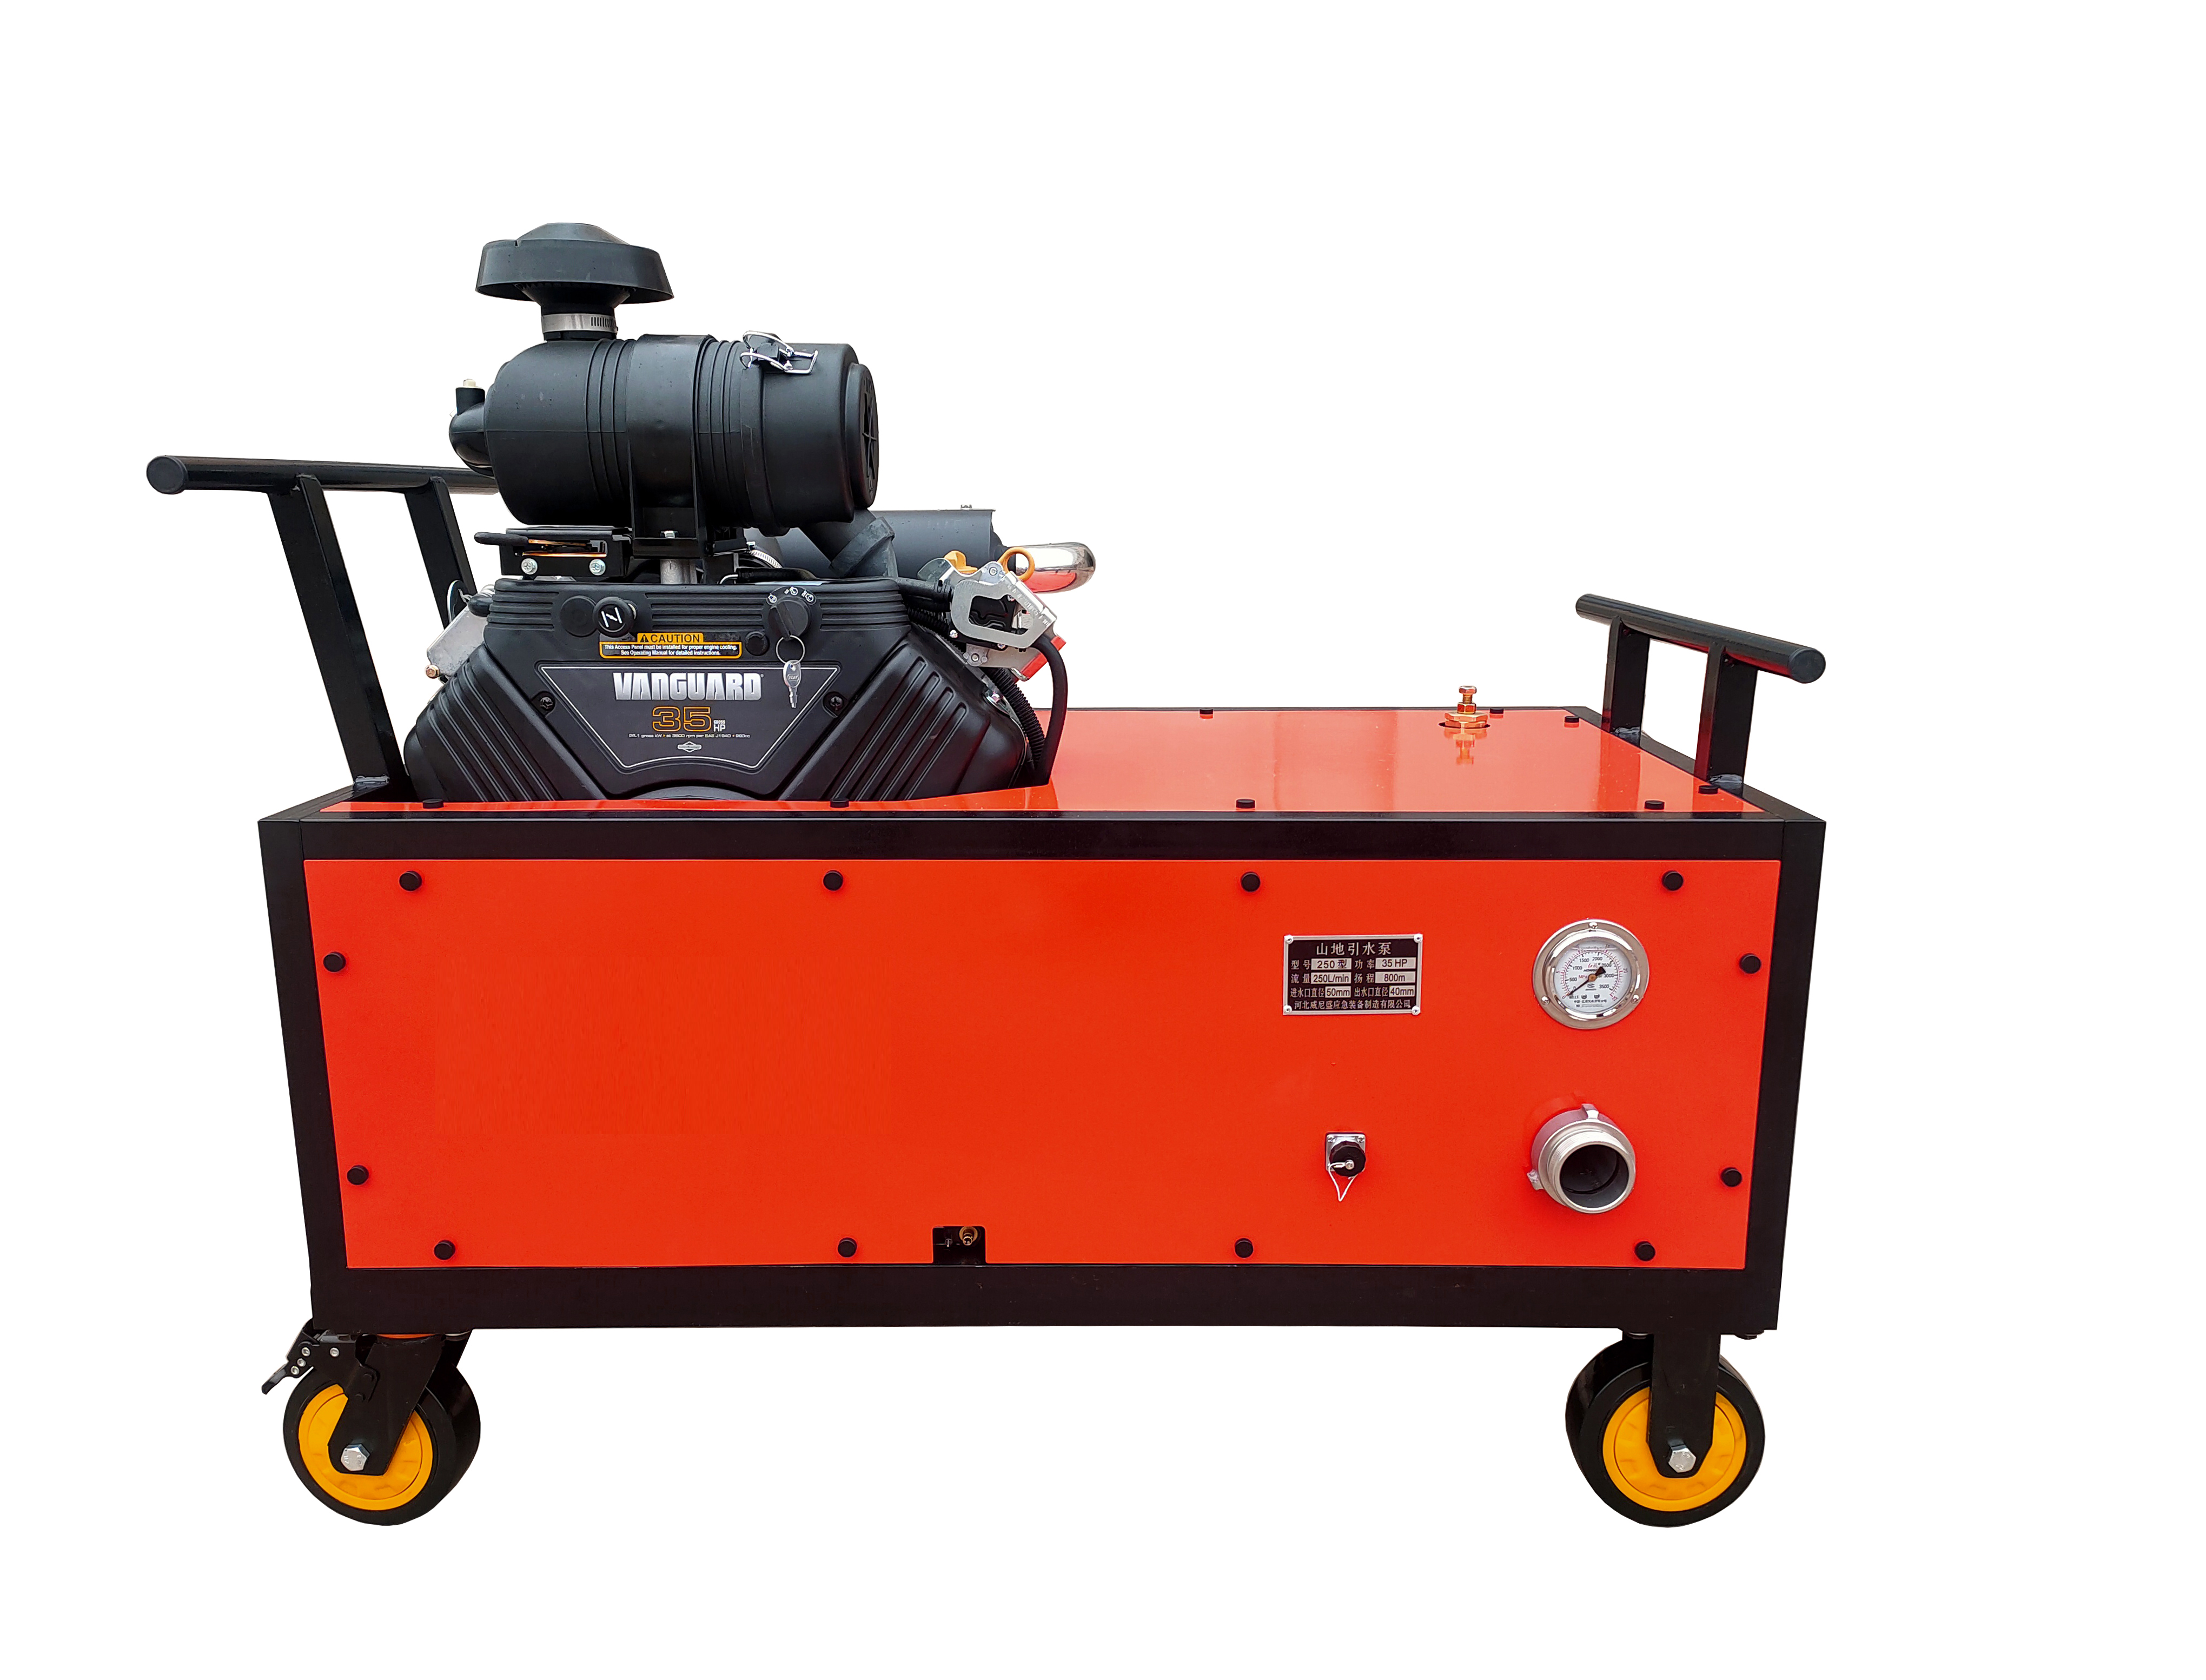 Ultra long distance water supply forestry fire pump Featured Image